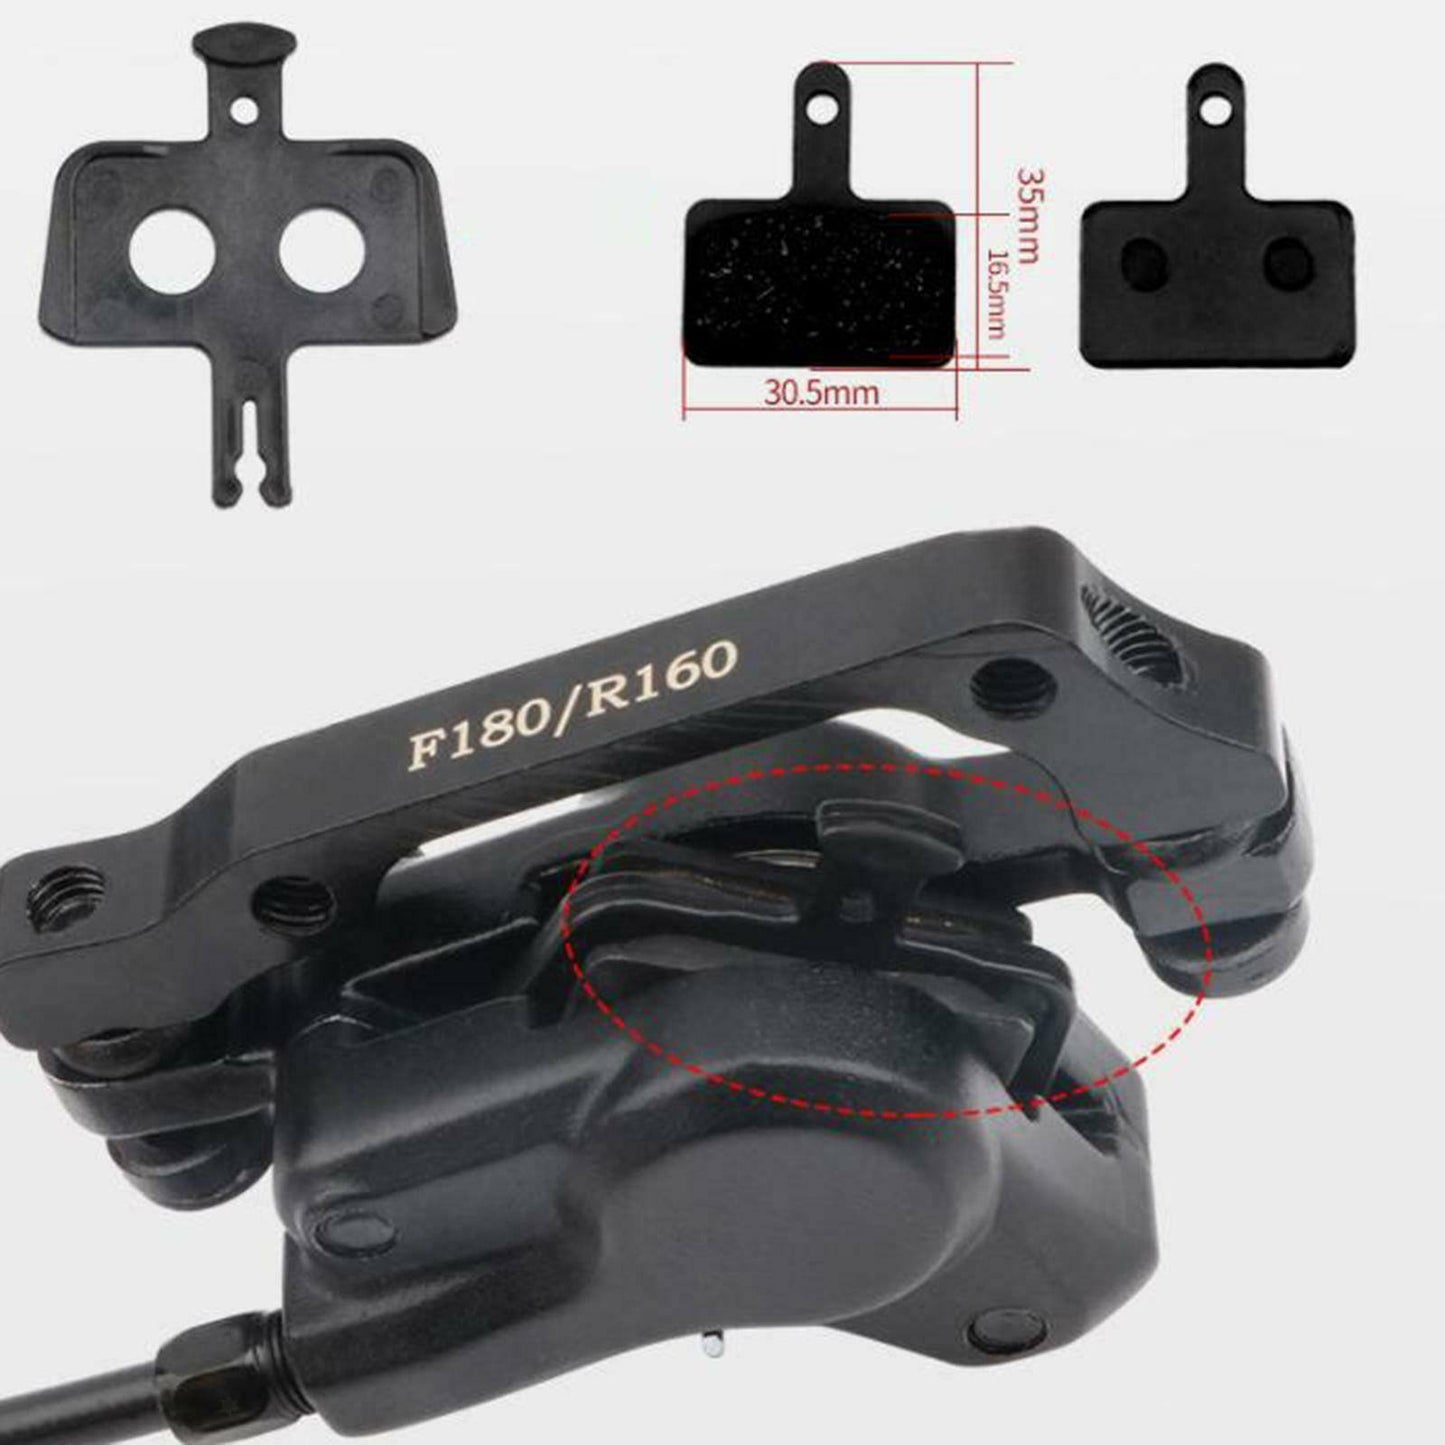 1600mm Bicycle Rear Hydraulic Brake Calliper Front Left Lever - TDRMOTO